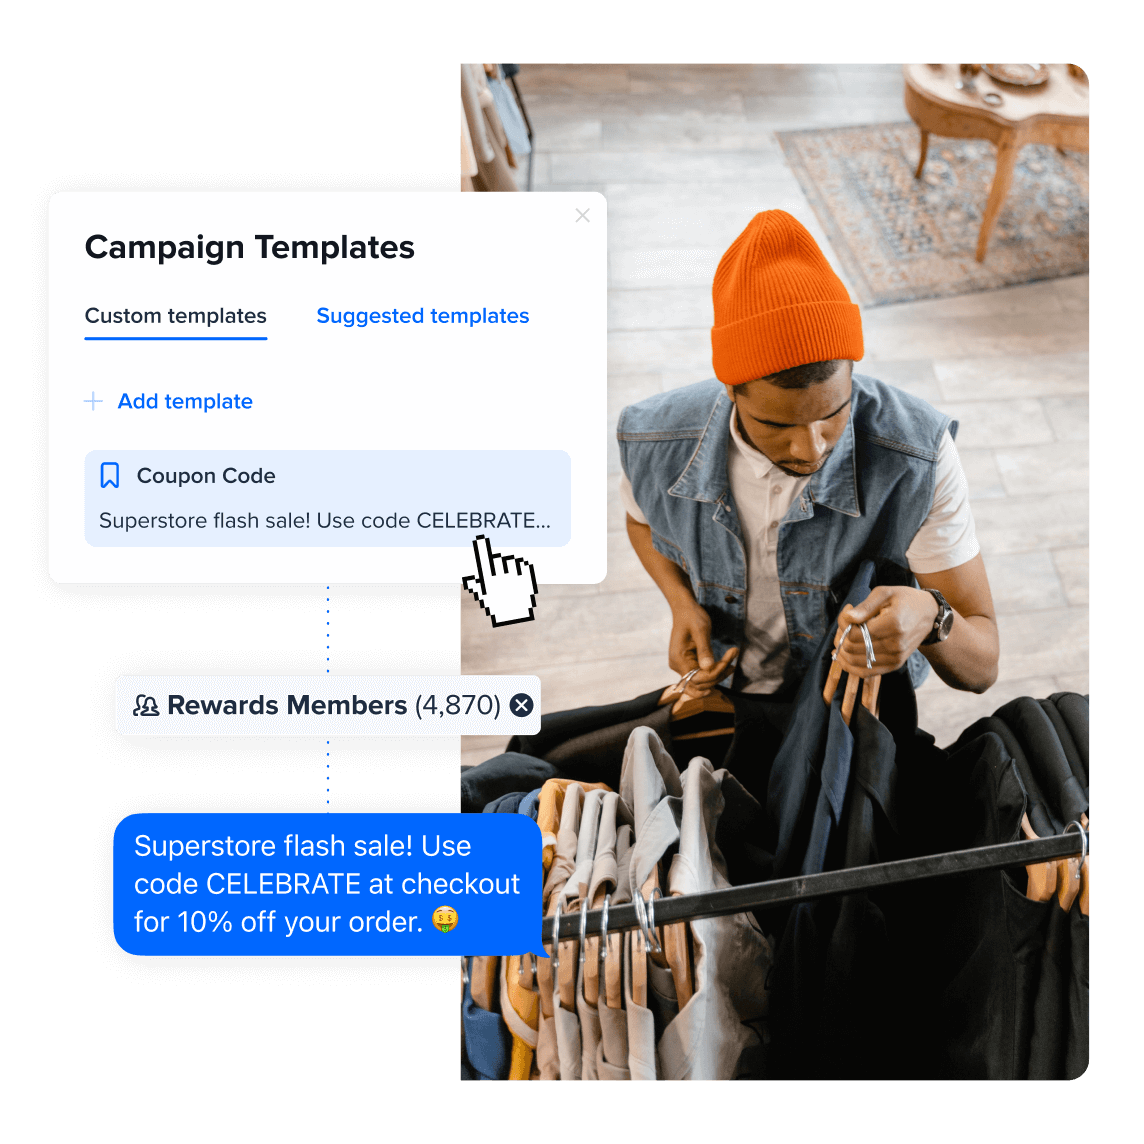 A mass texting software interface showcasing a campaign template for a flash sale with a coupon code, superimposed over a man browsing clothing racks, demonstrating how retail businesses can quickly send promotional offers to thousands of rewards members.